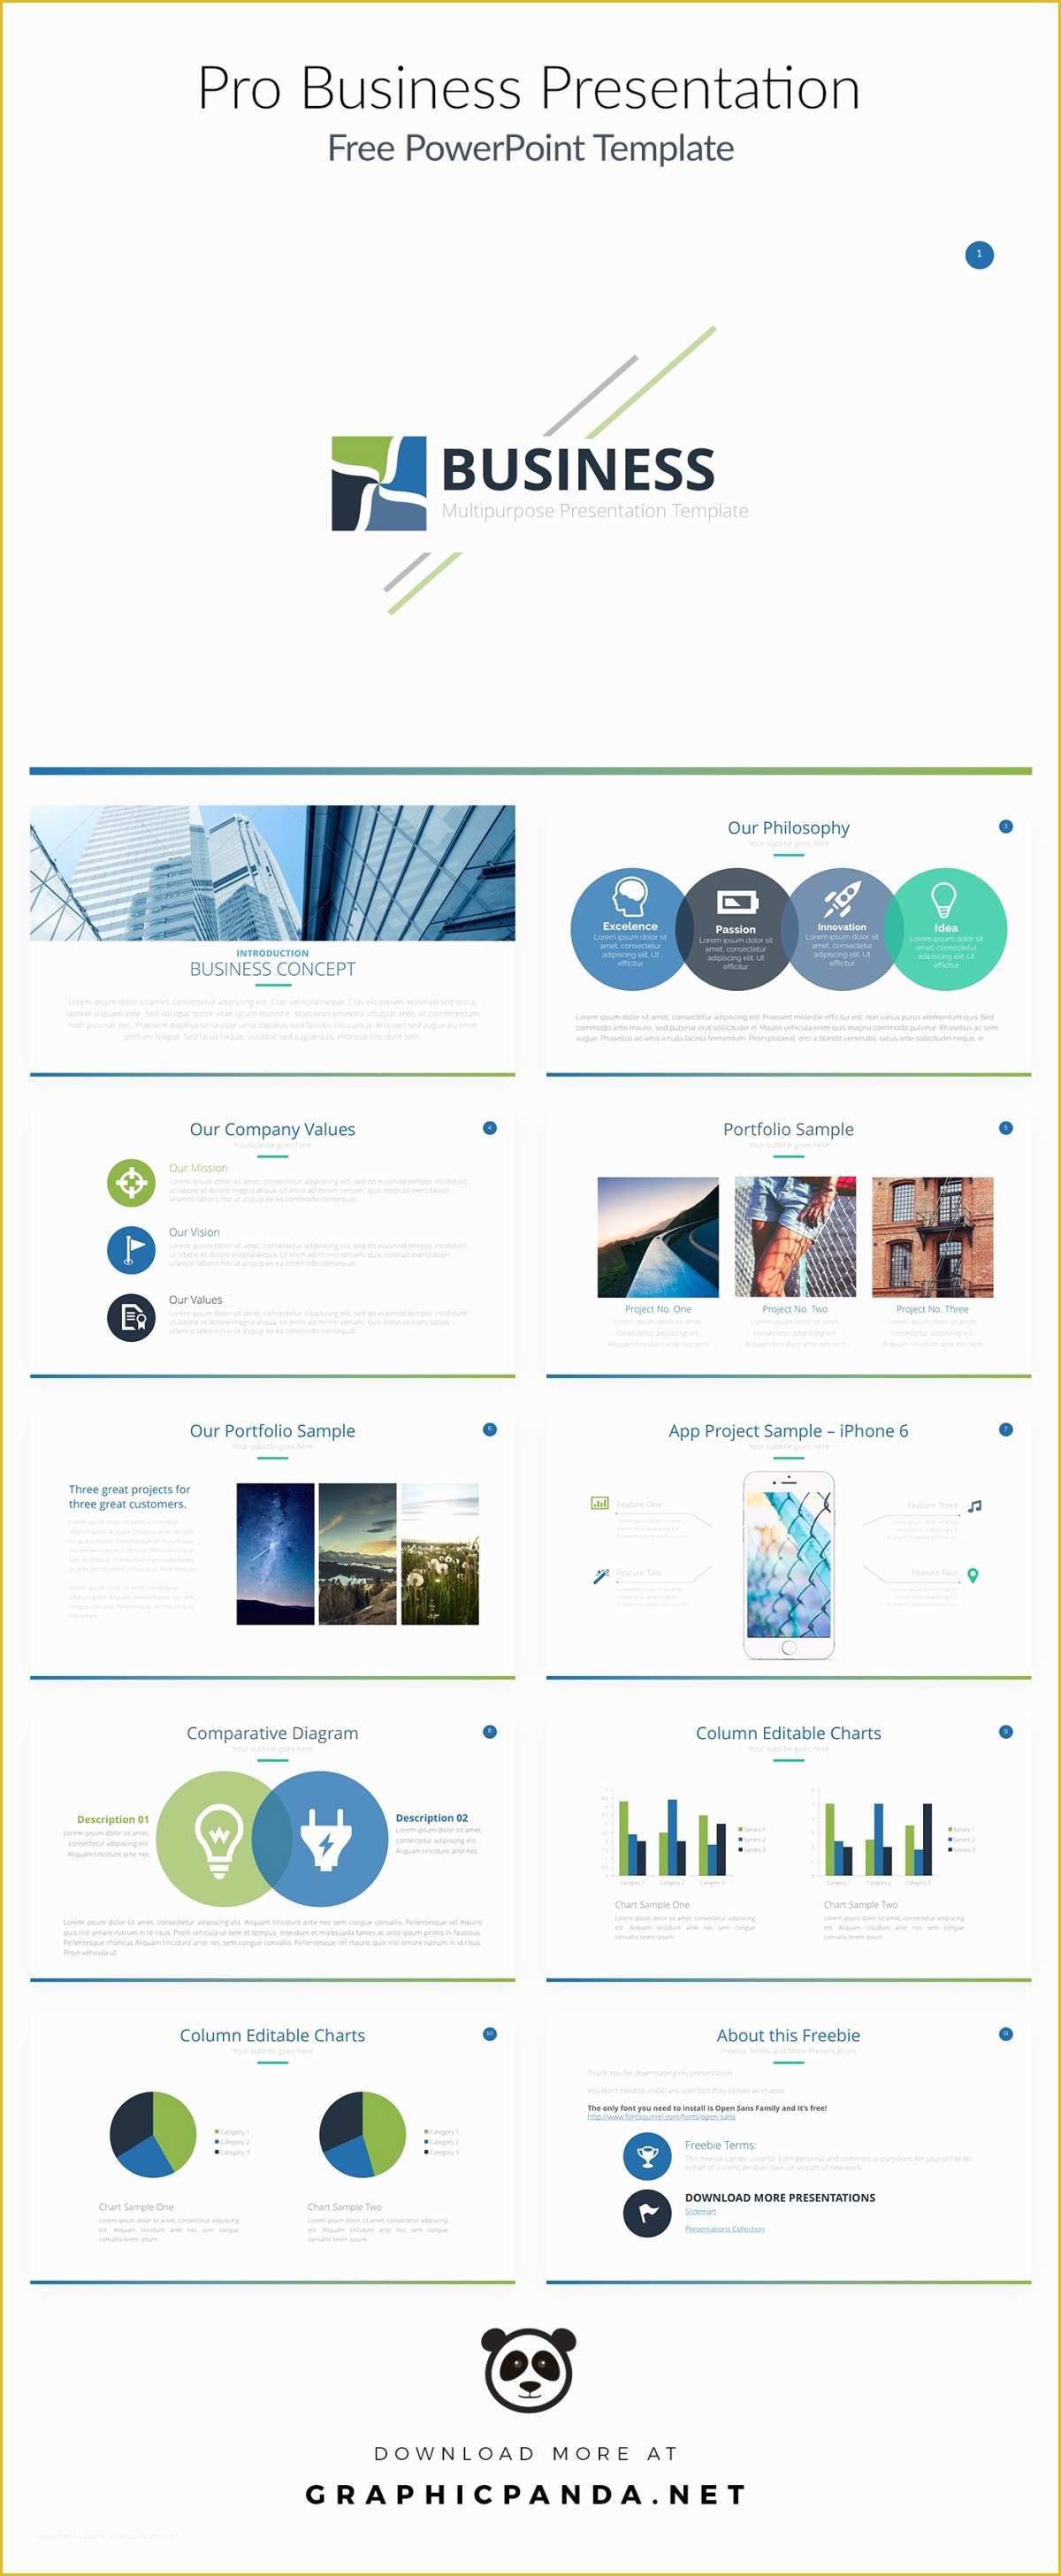 Free Keynote Templates 2017 Of Firm Pitch Deck Free Powerpoint and Keynote Templates